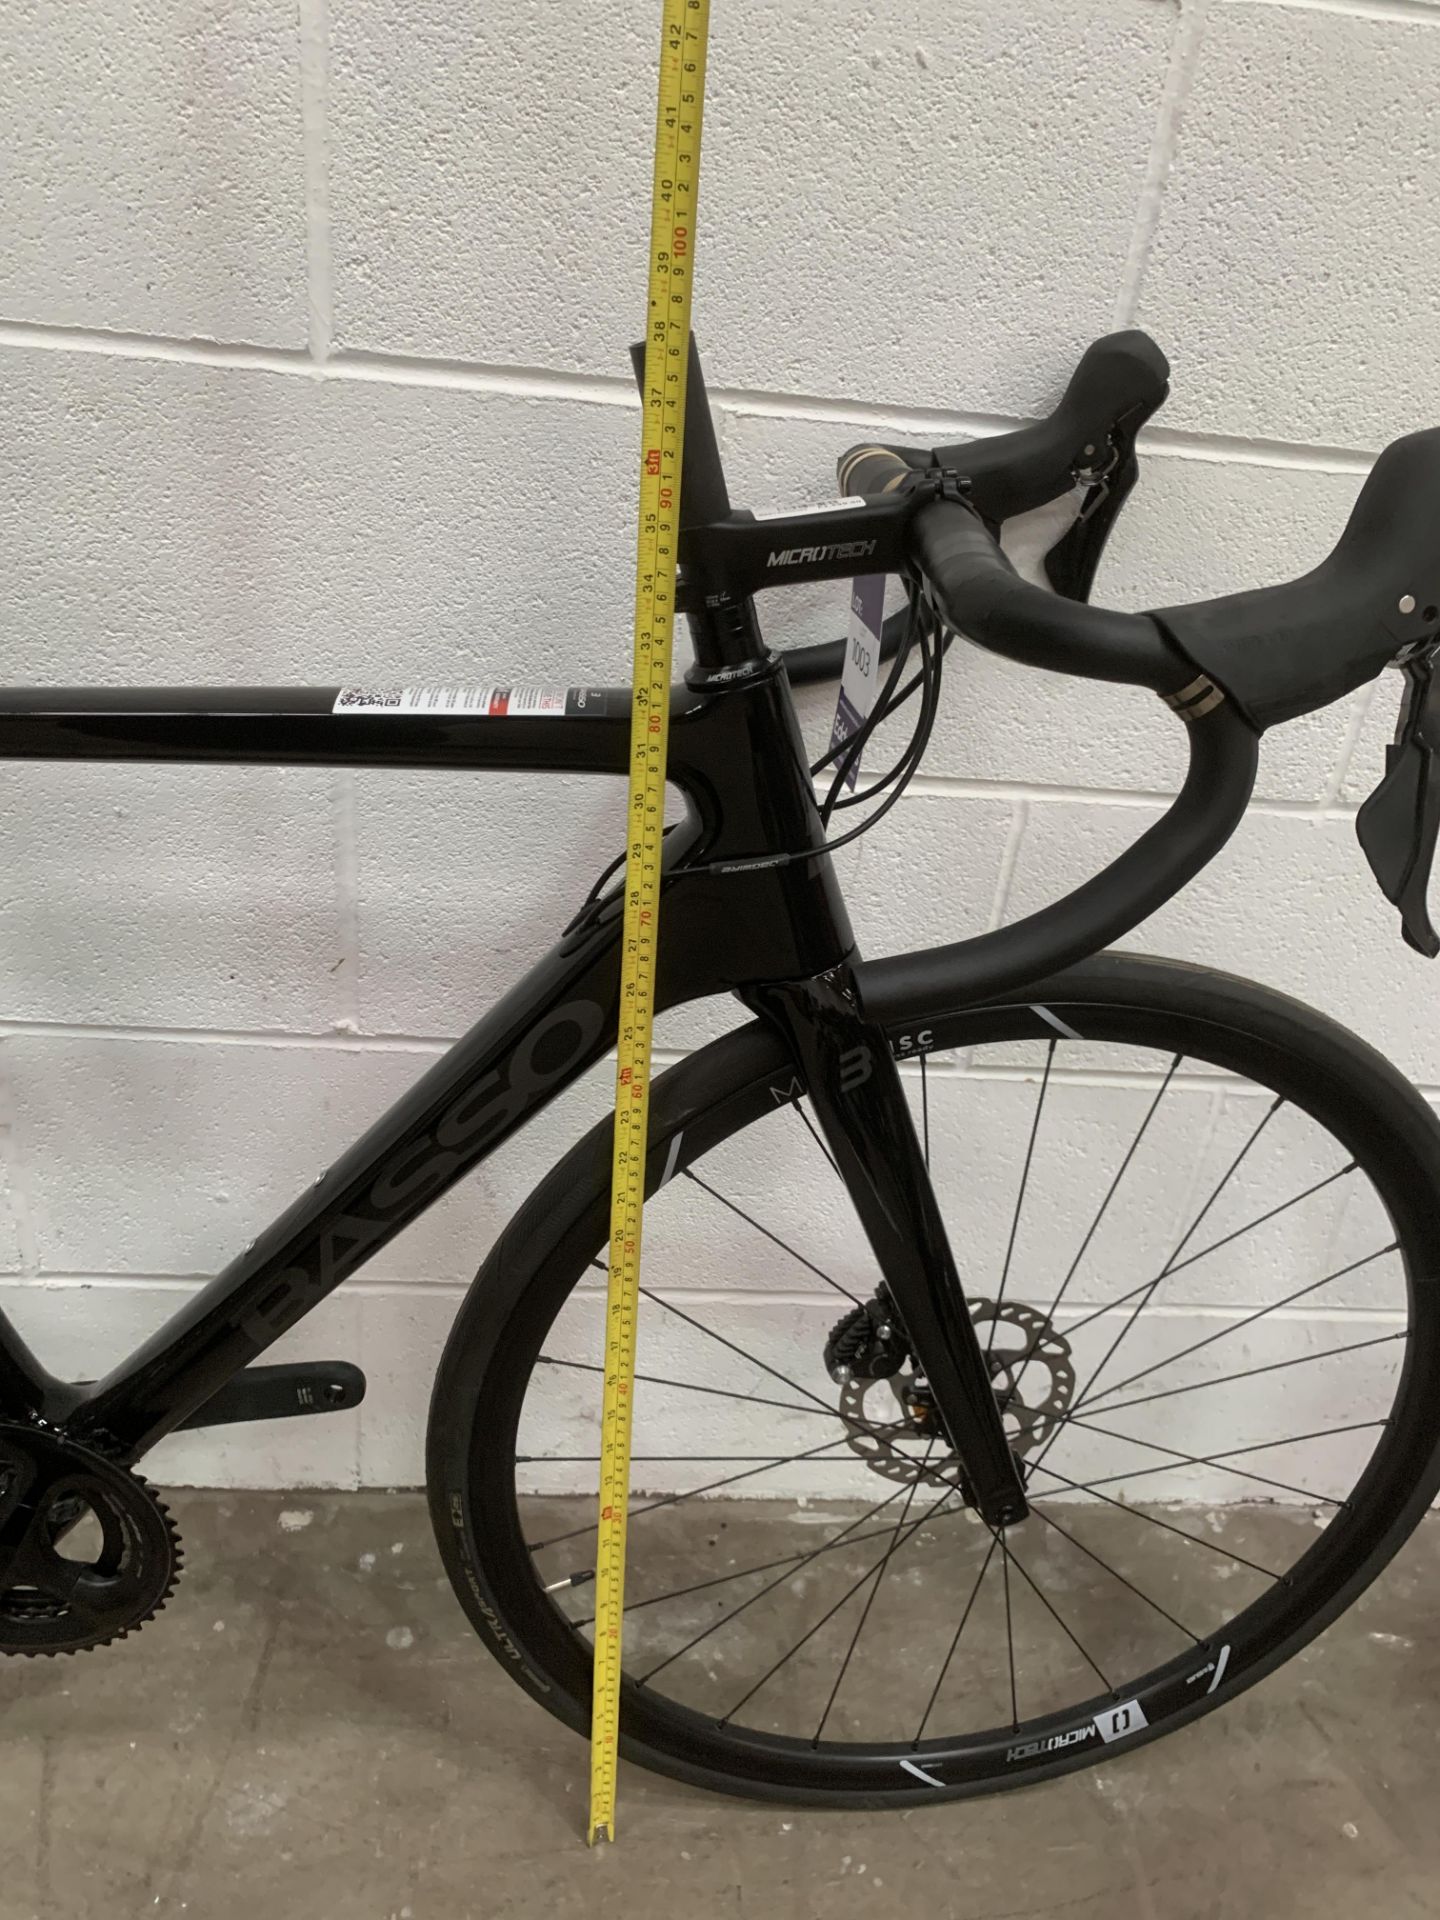 Basso Venta 'Carbon' Bicycle. RRP £2599 - Image 10 of 11